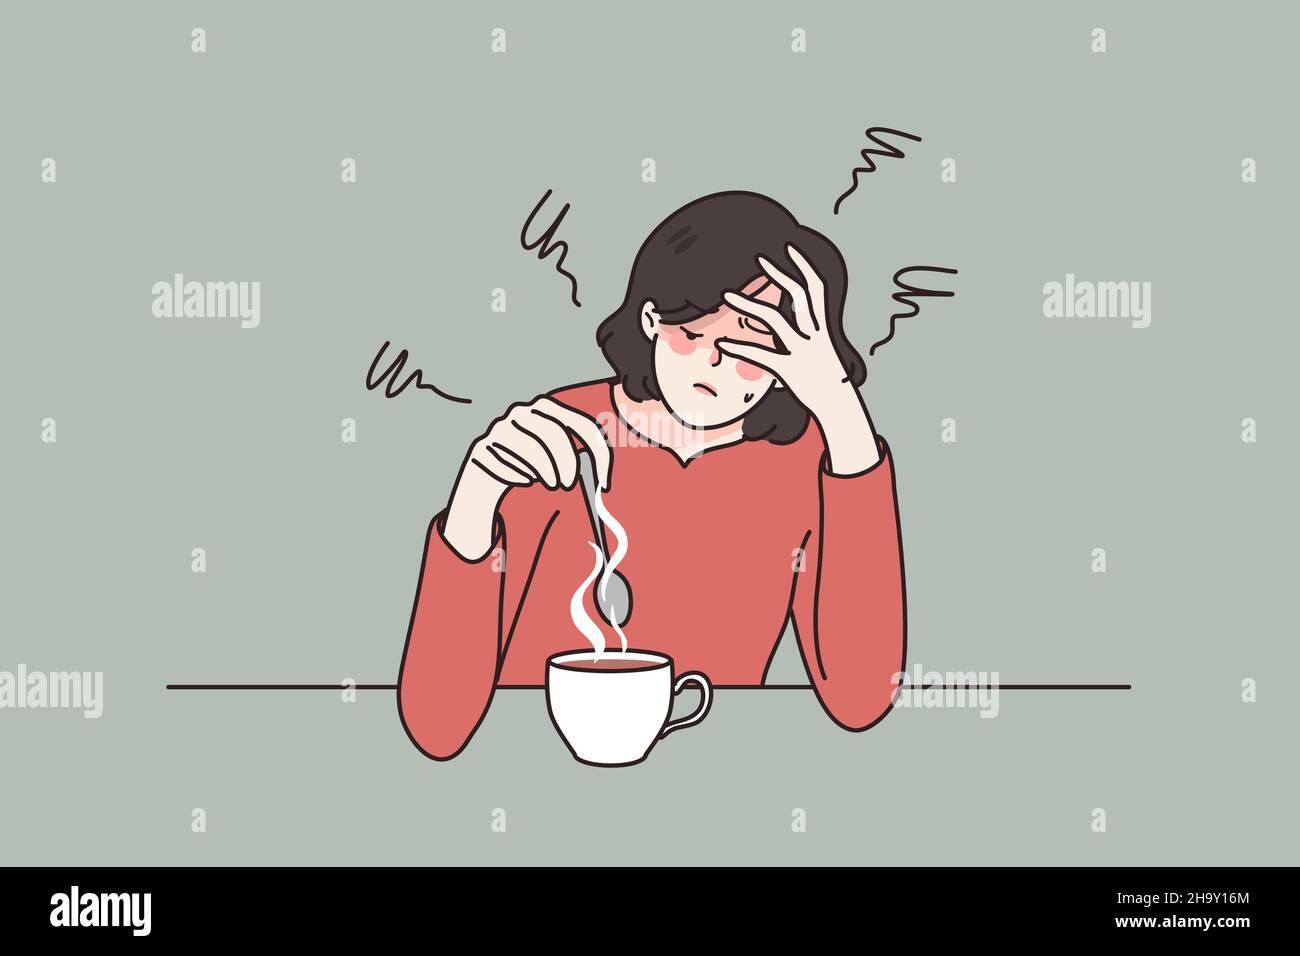 Exhausted young woman sit at table drink coffee feel fatigue or drowsiness. Tired female suffer from overwork lack energy need caffeine. Overwhelmed with work. Flat vector illustration.  Stock Vector